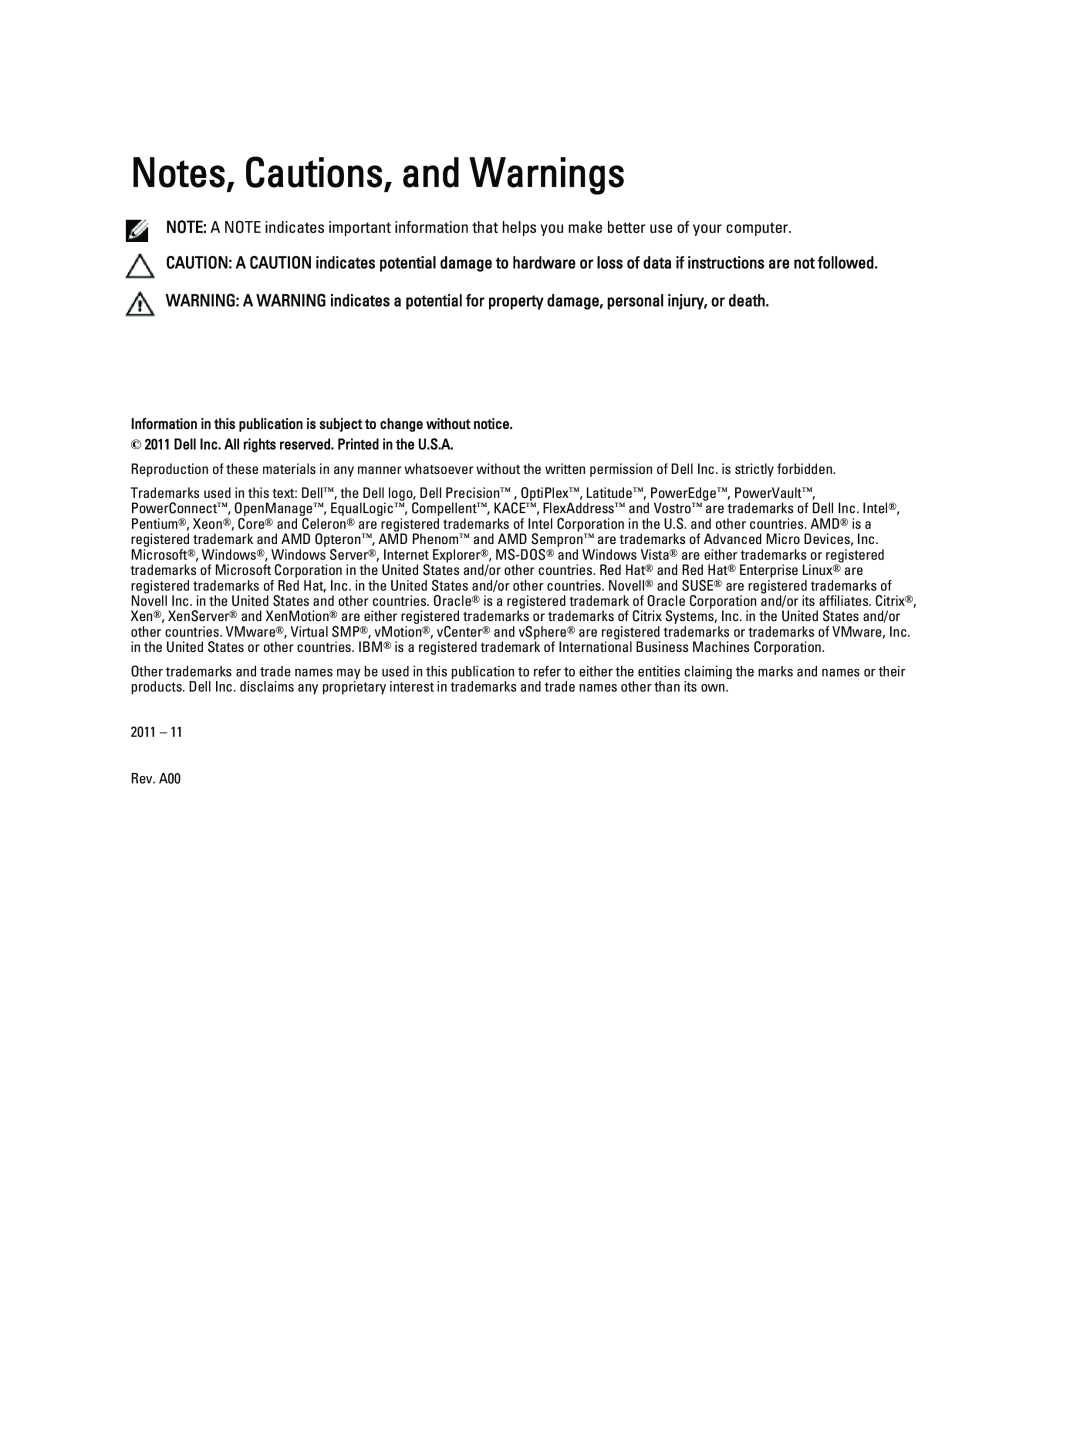 Dell R820 manual Notes, Cautions, and Warnings, Information in this publication is subject to change without notice 